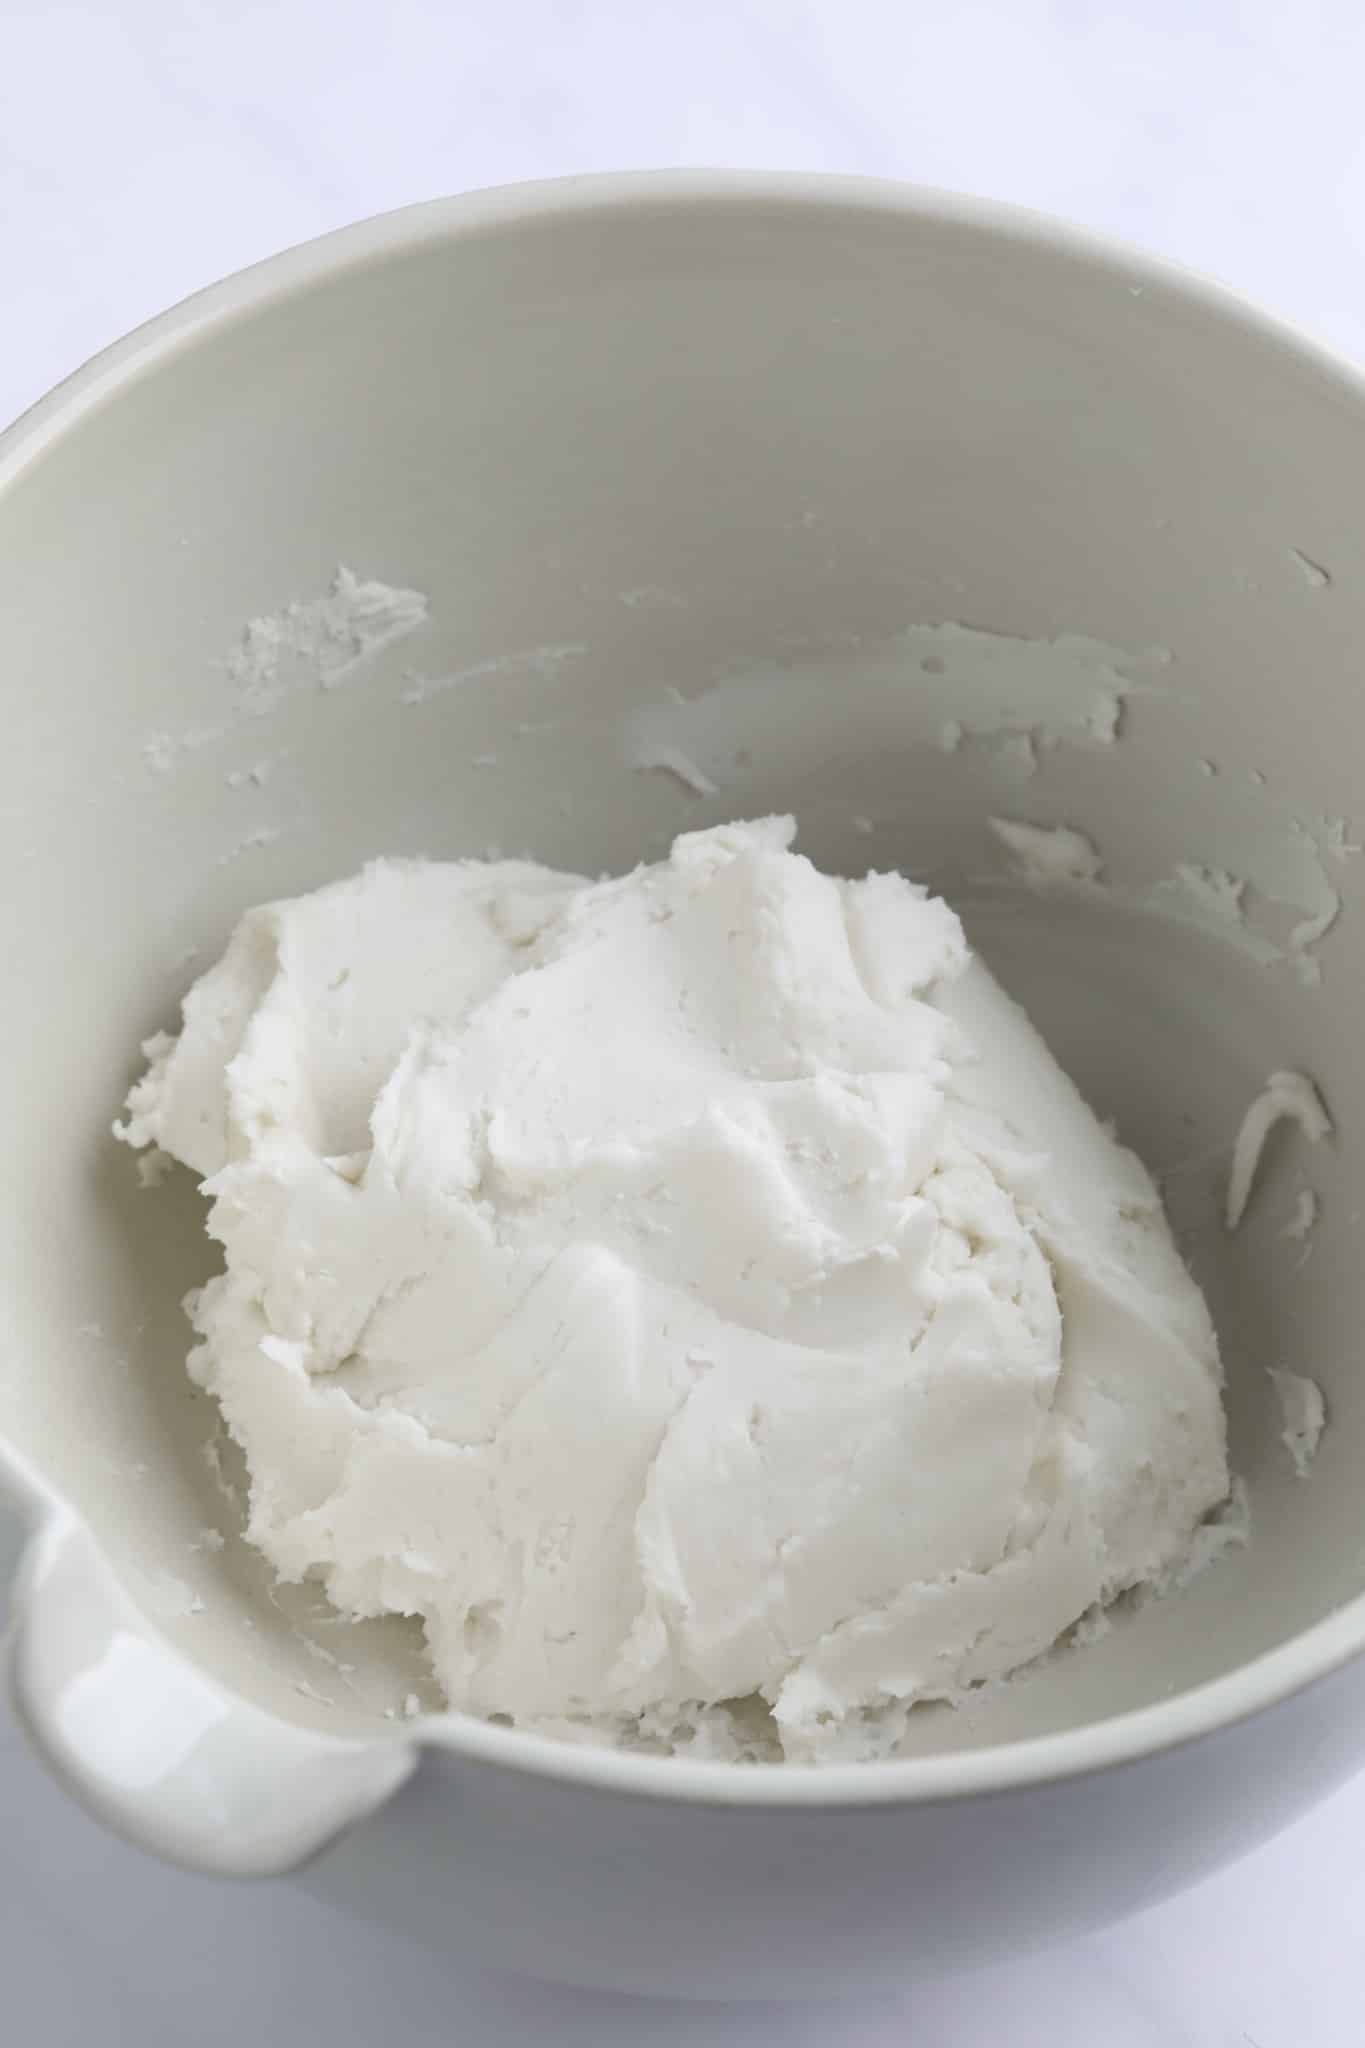 a ball of white dough in a large white bowl.